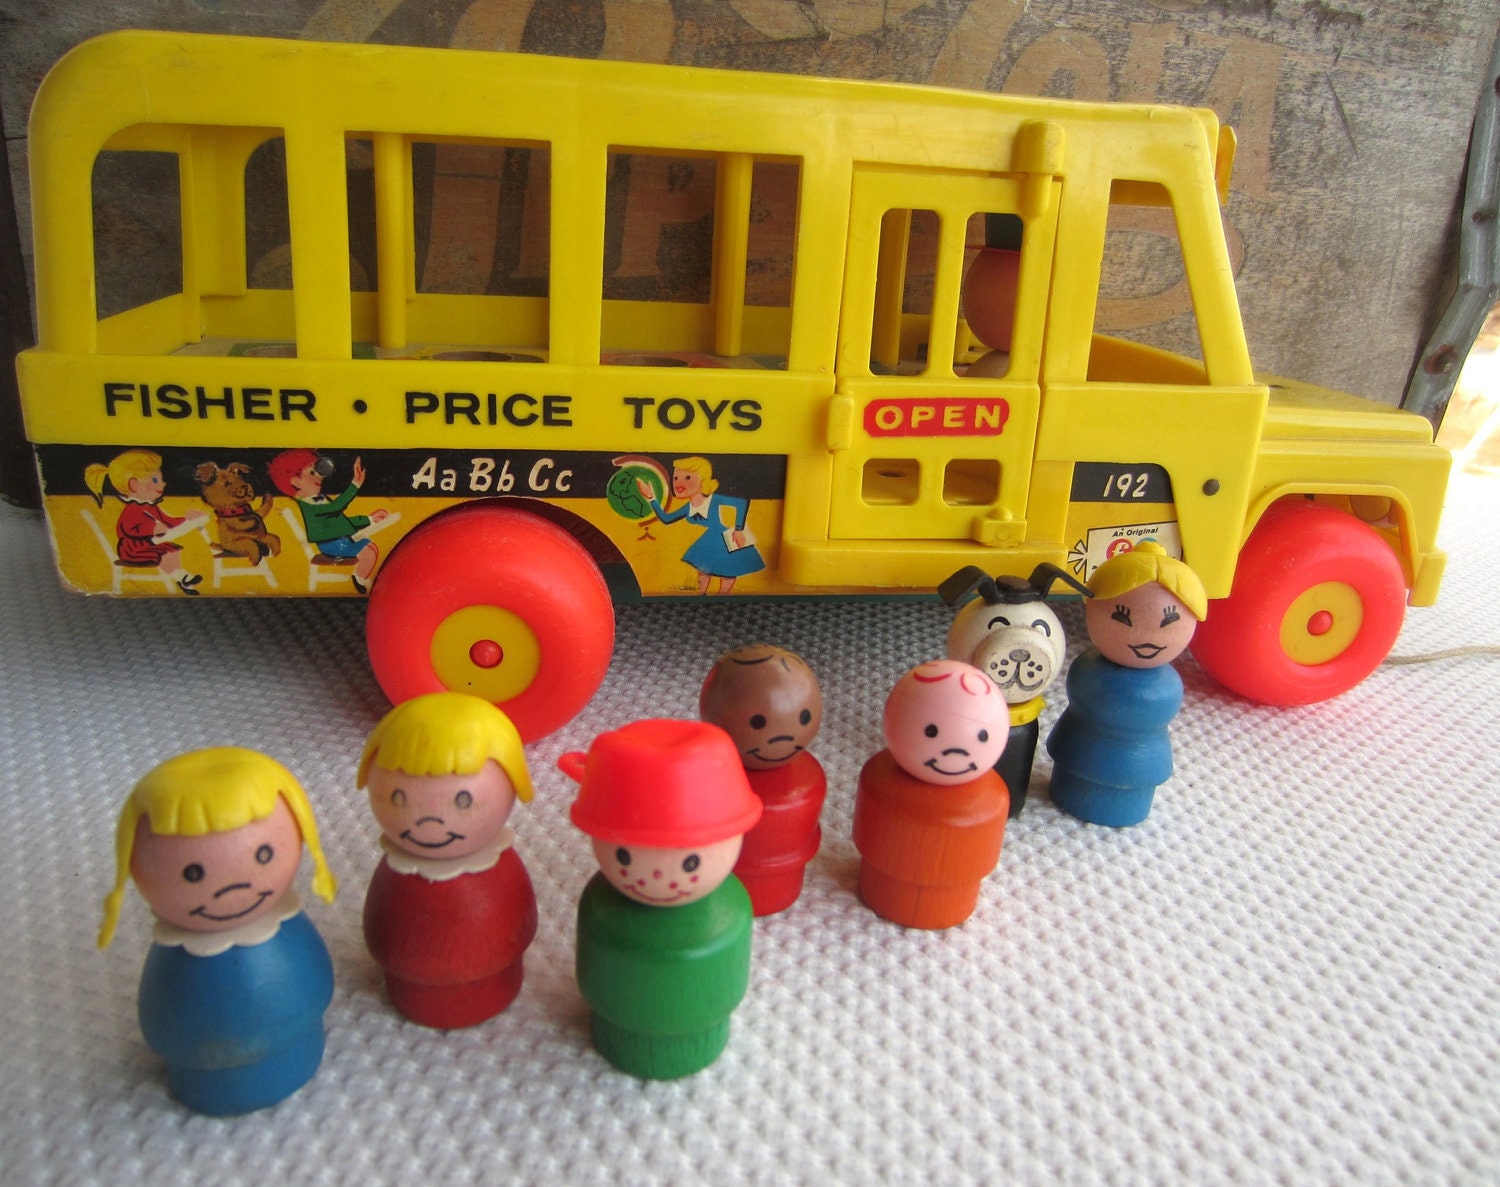 Vintage 1965 Fisher Price School Bus Loaded with Wooden People